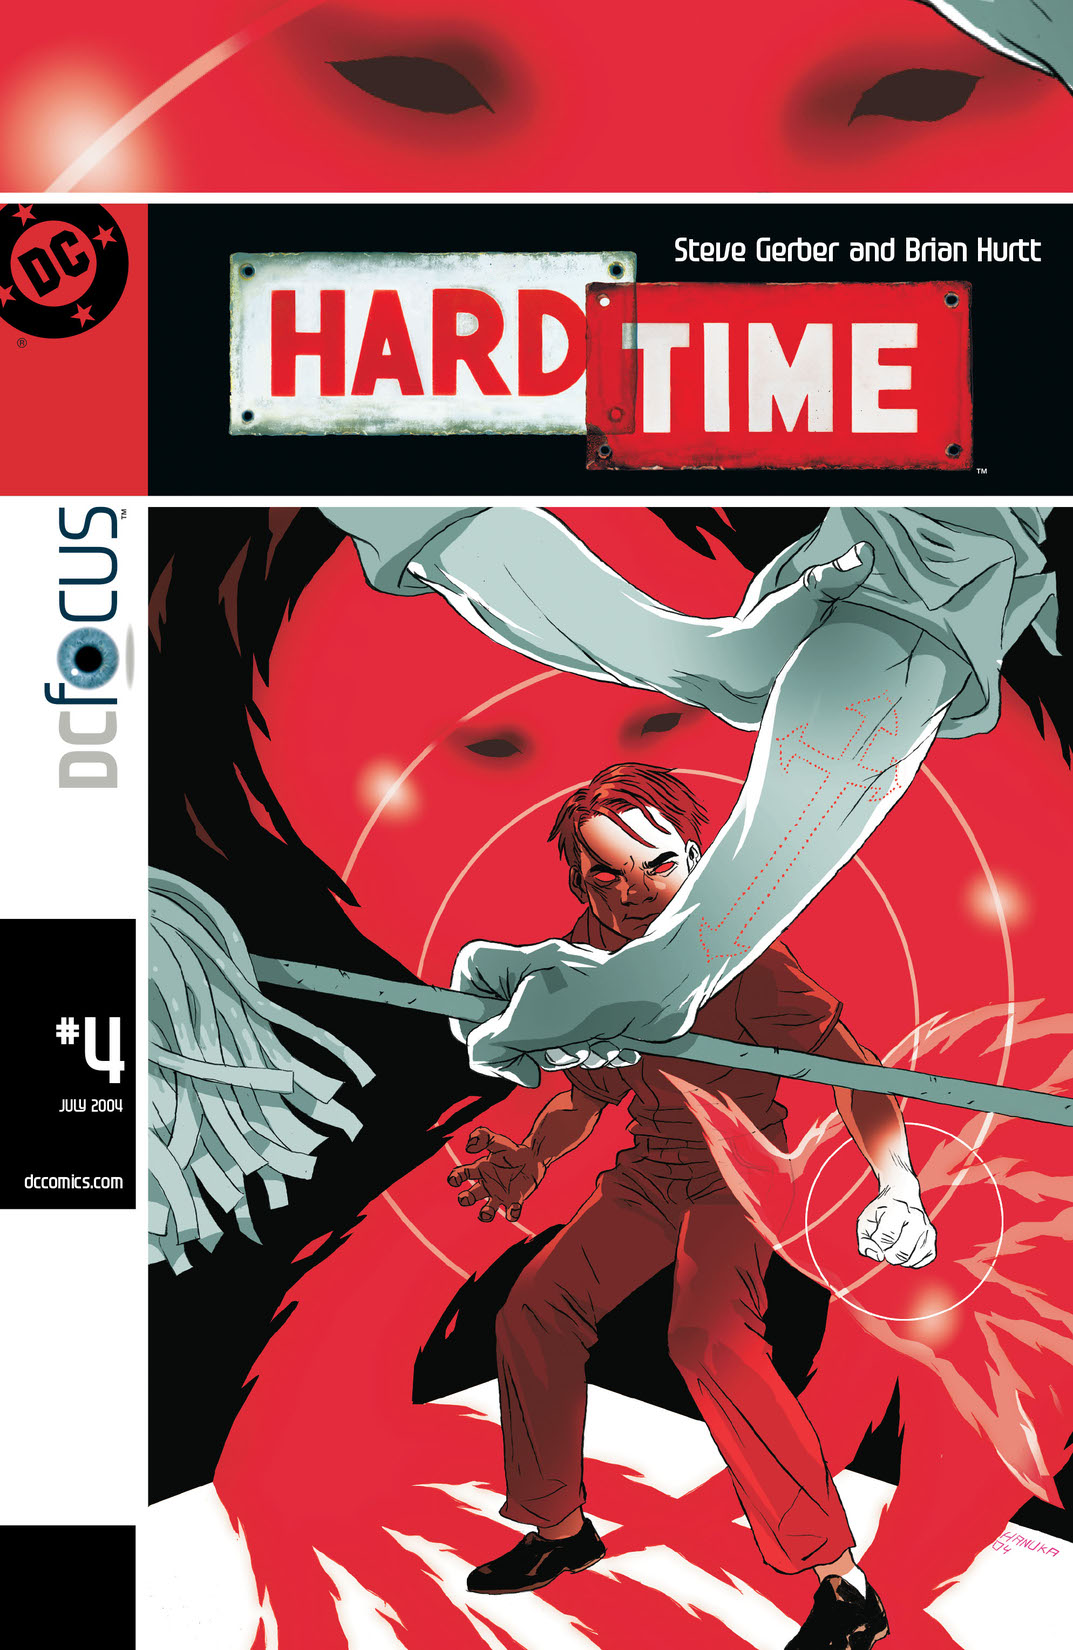 Hard Time #4 preview images